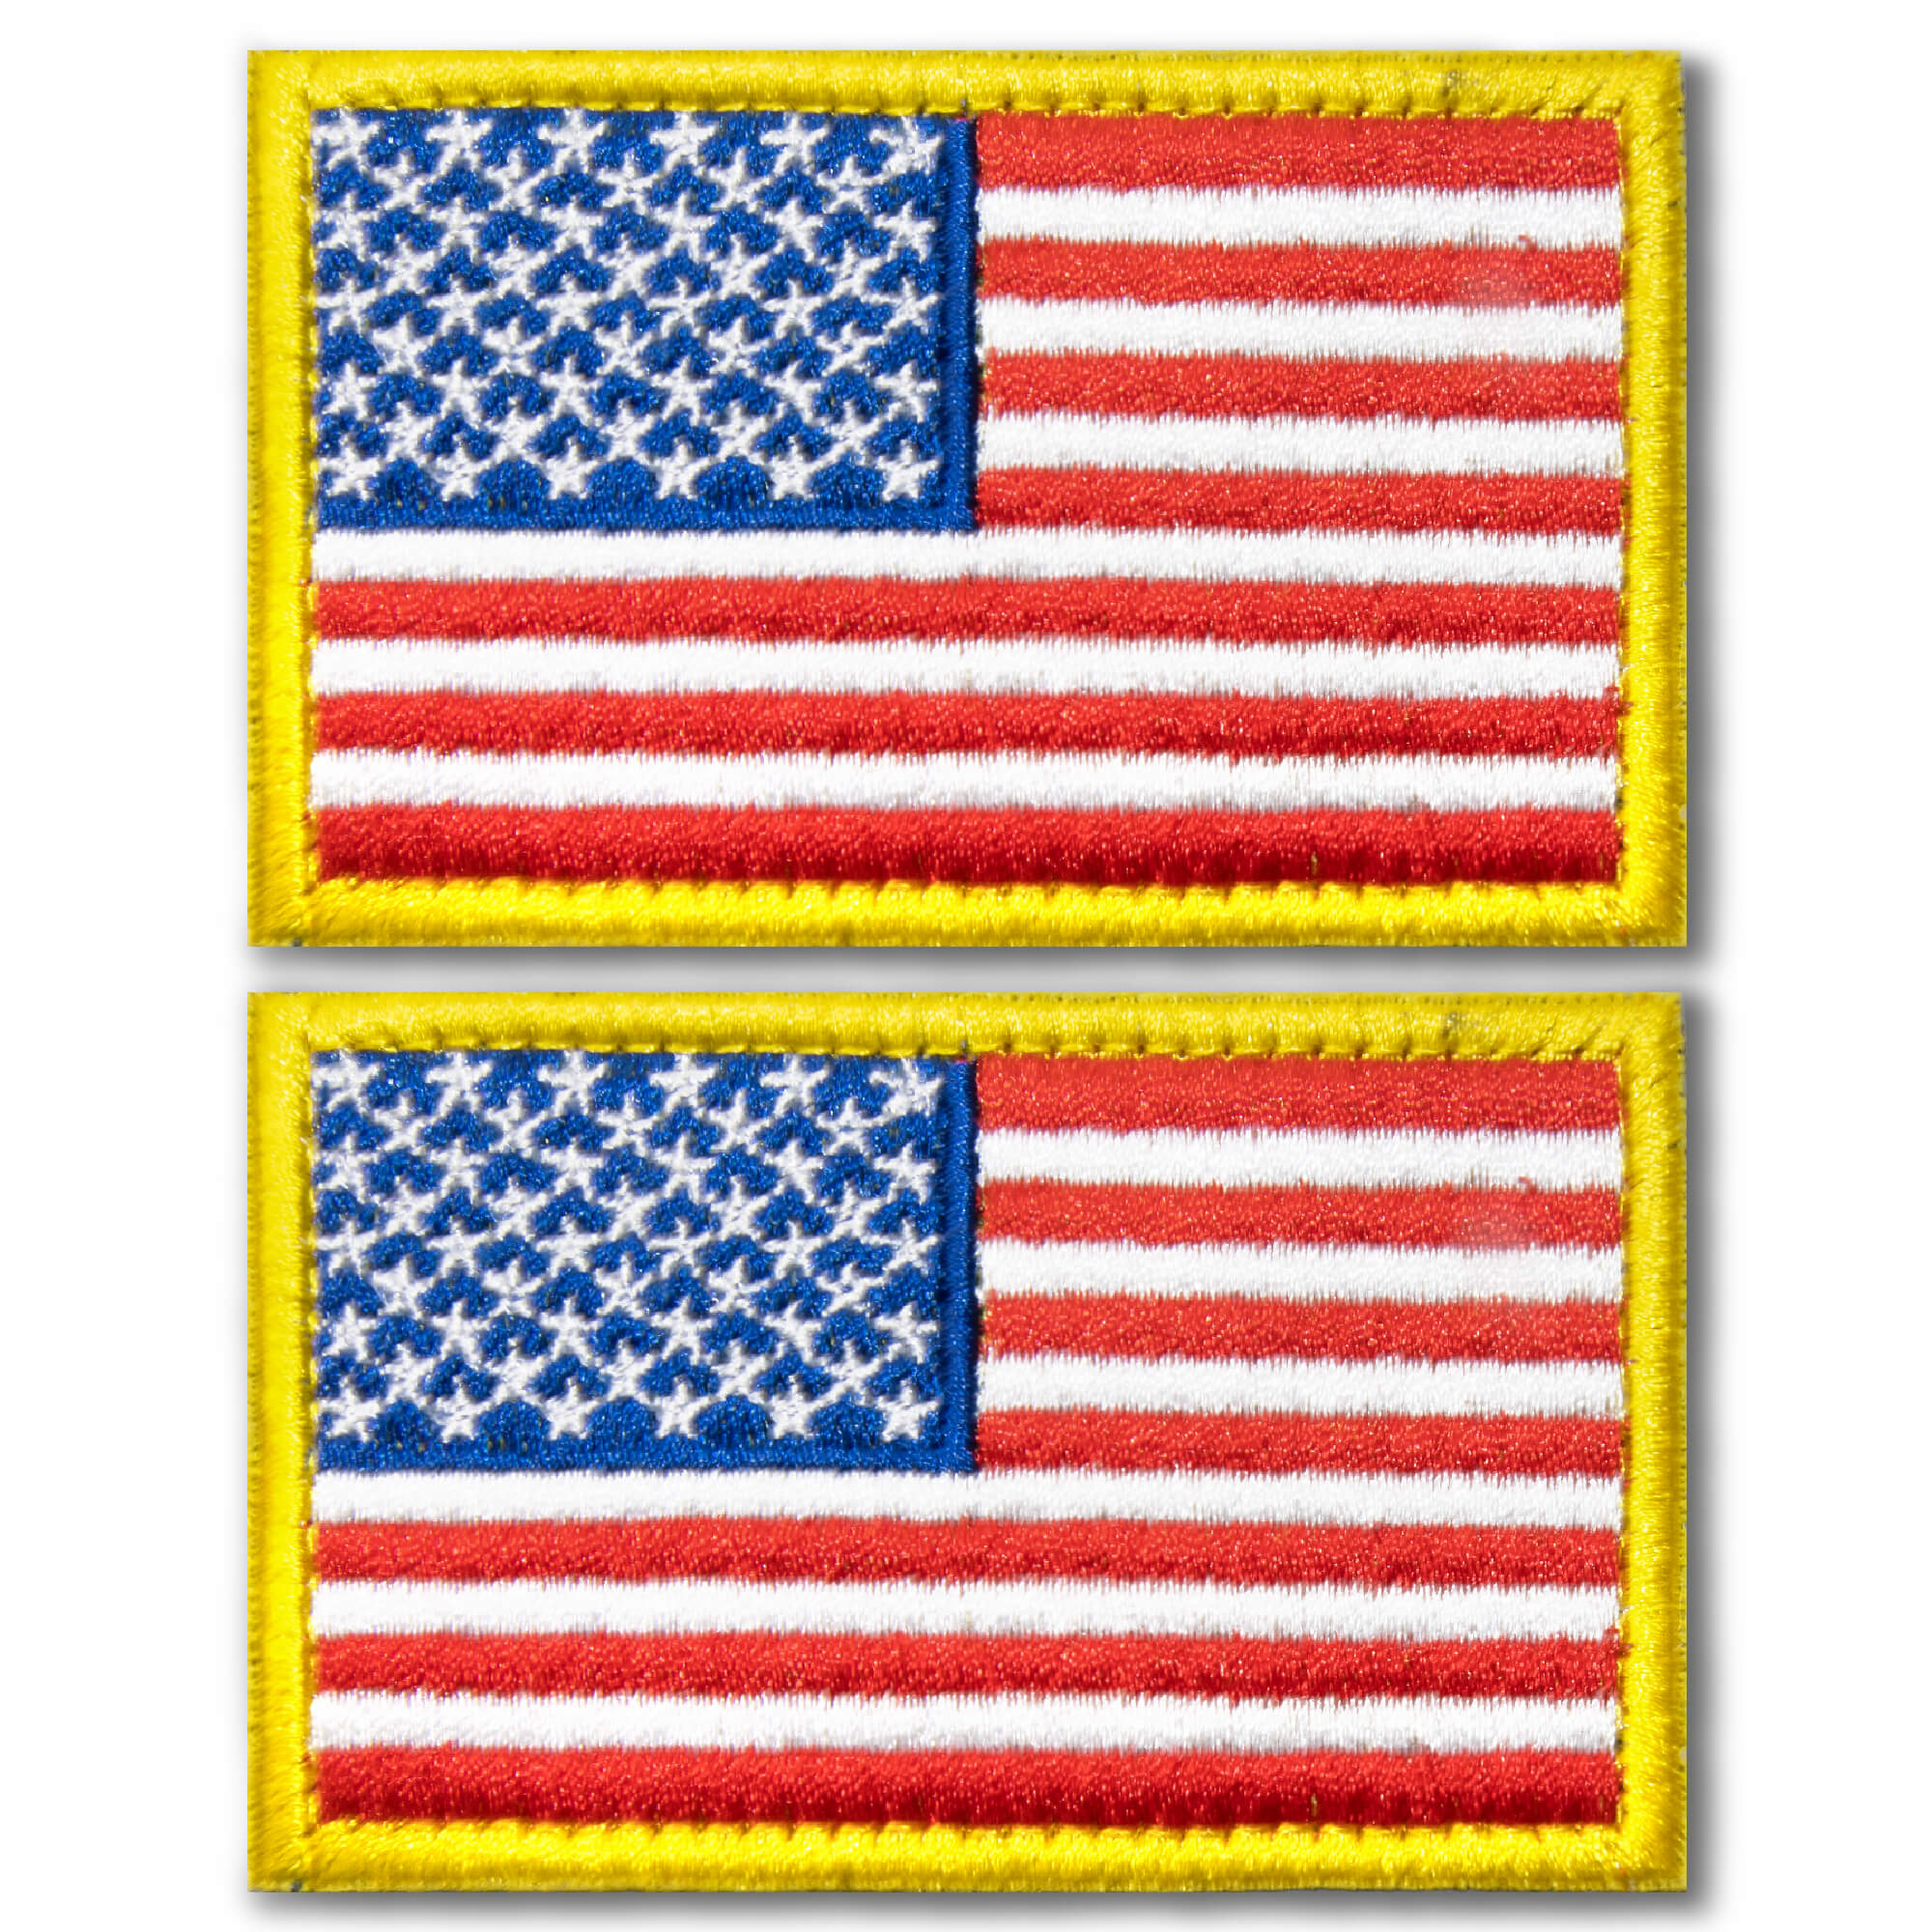 Anley Tactical USA Flag Embroidered Patches (2 Pack) - 2 inchx 3 inch American US Flag Military Uniform Sew on Emblem Patch - Loop & Hook Fasteners